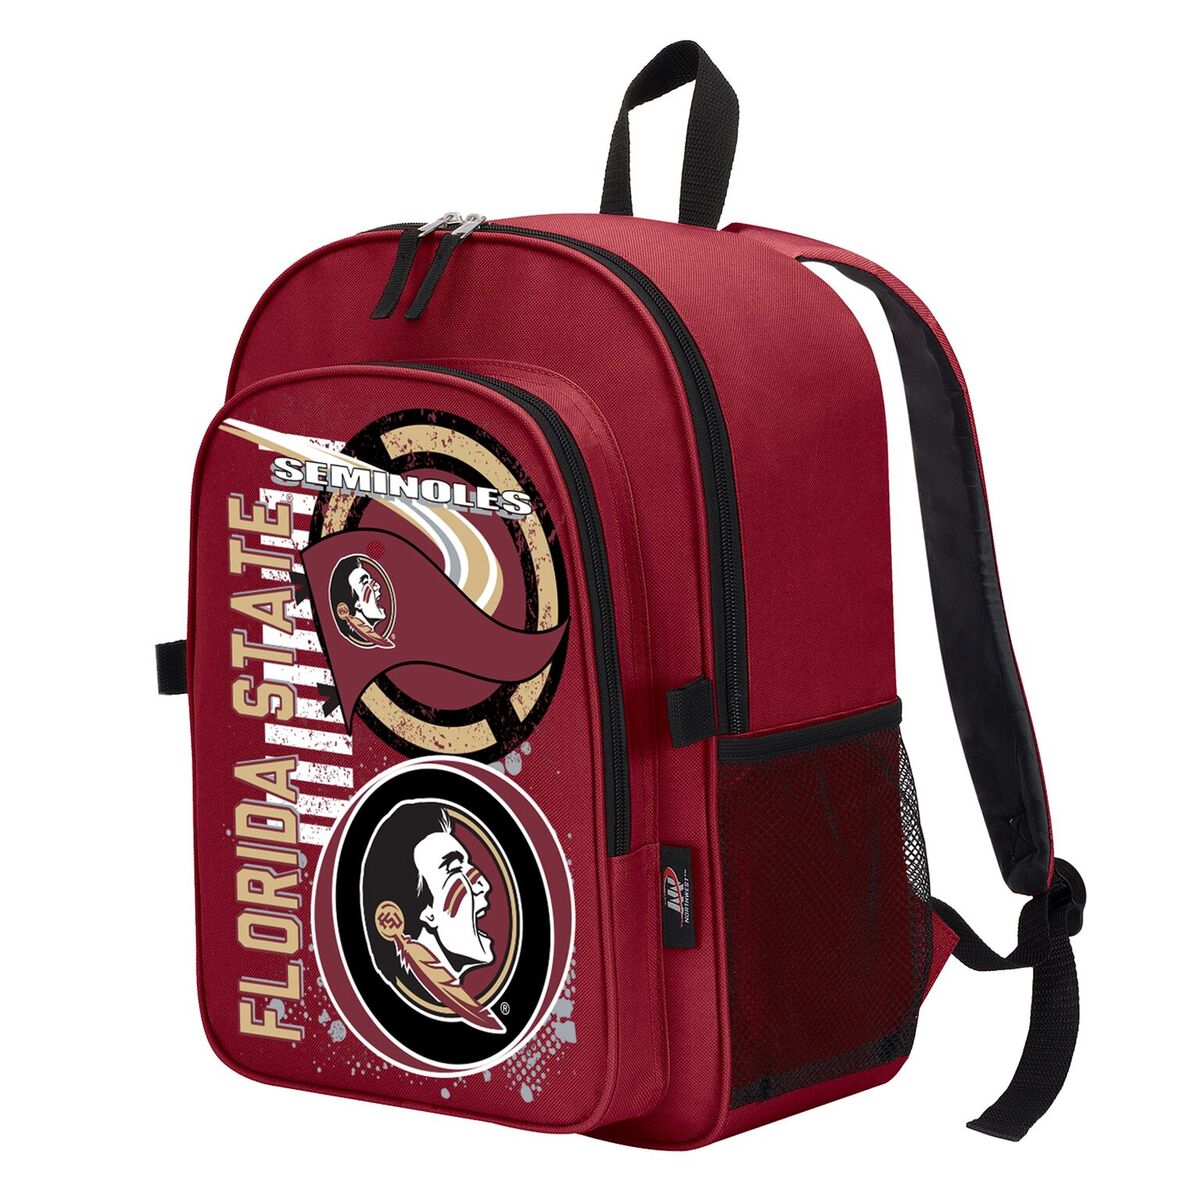 Florida State Seminoles "Accelerator" Backpack and Lunch Kit Set - image 5 of 9